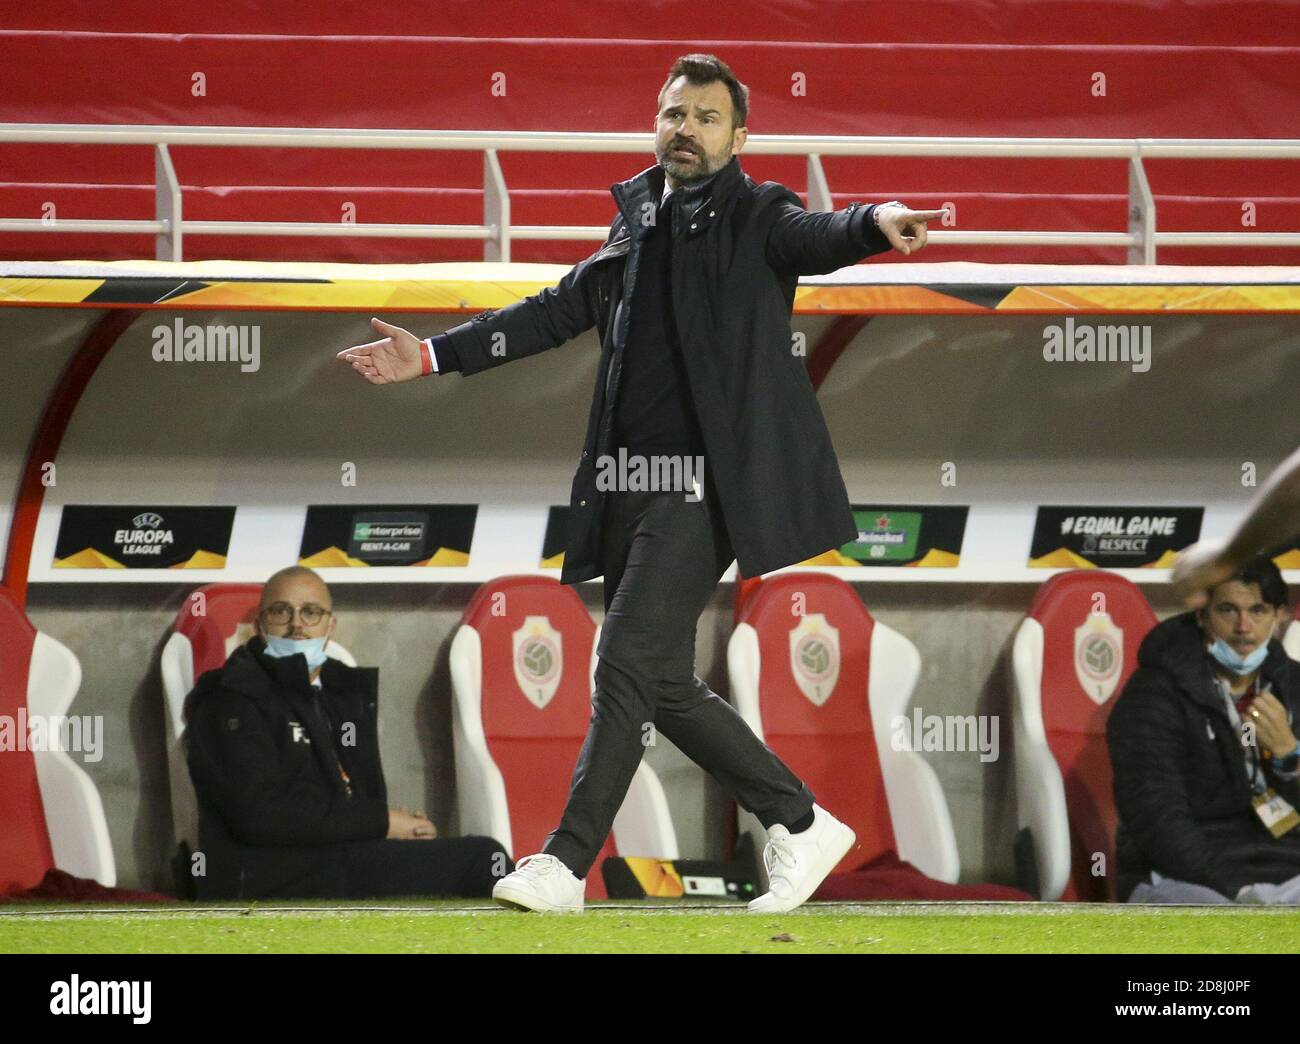 Royal Antwerp Coach High Resolution Stock Photography and Images - Alamy